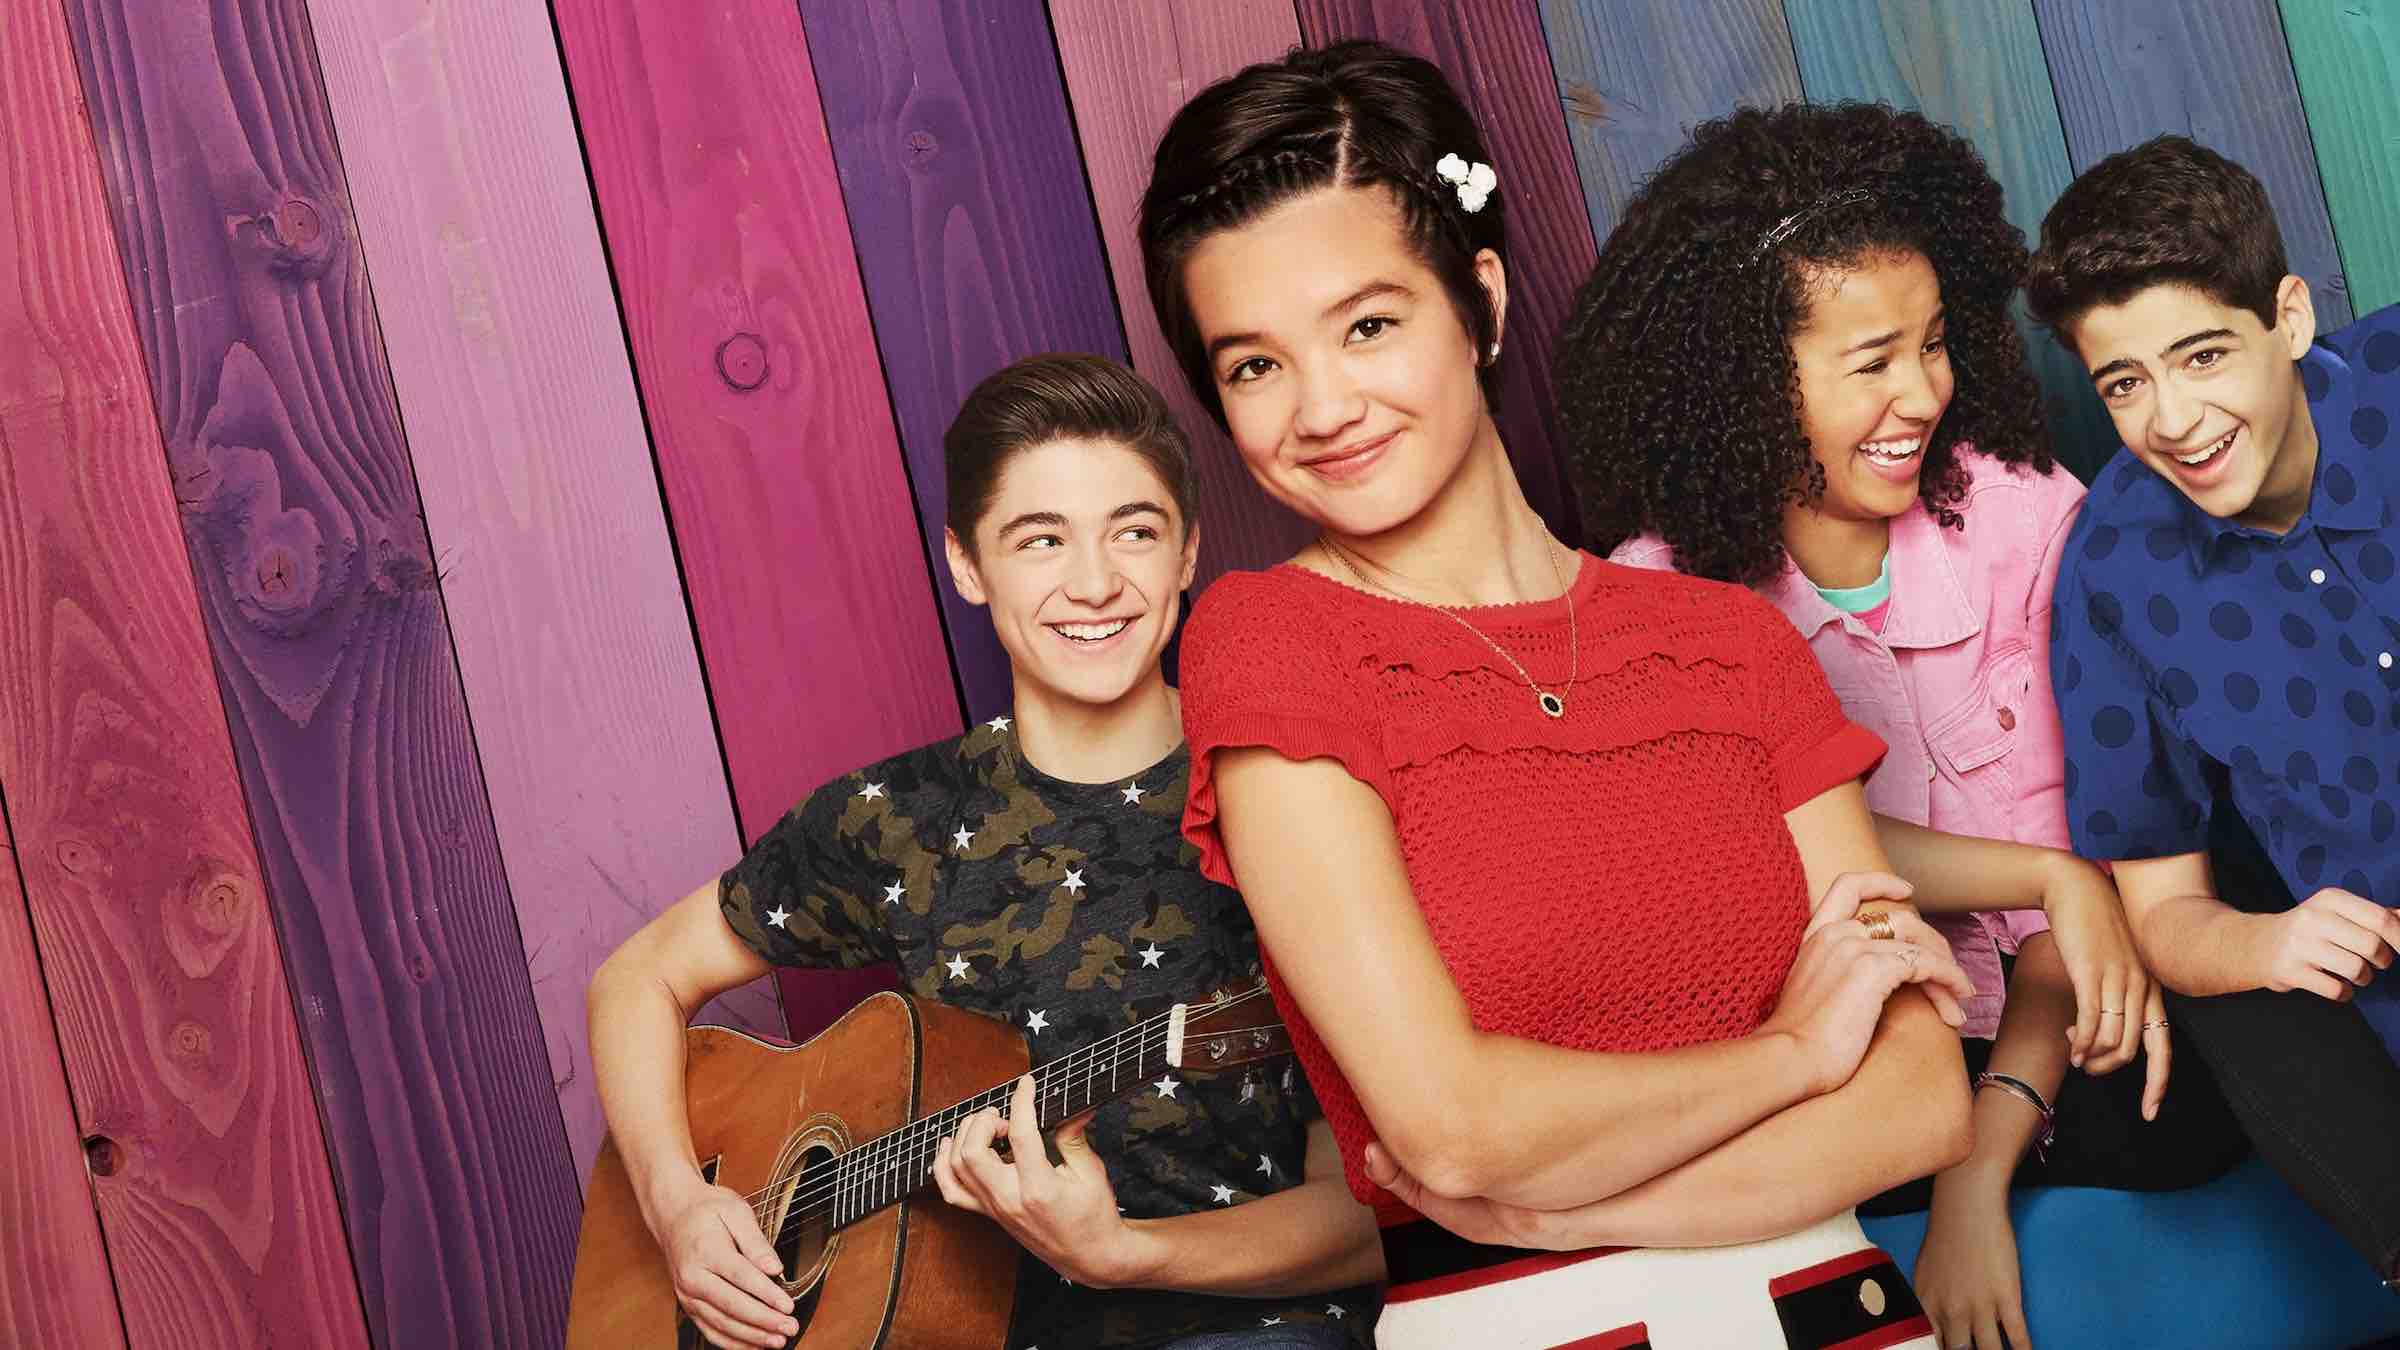 We took to Twitter to see how viewers are fighting to save 'Andi Mack', and the responses have proven the fandom to be quite headstrong in their devotion.